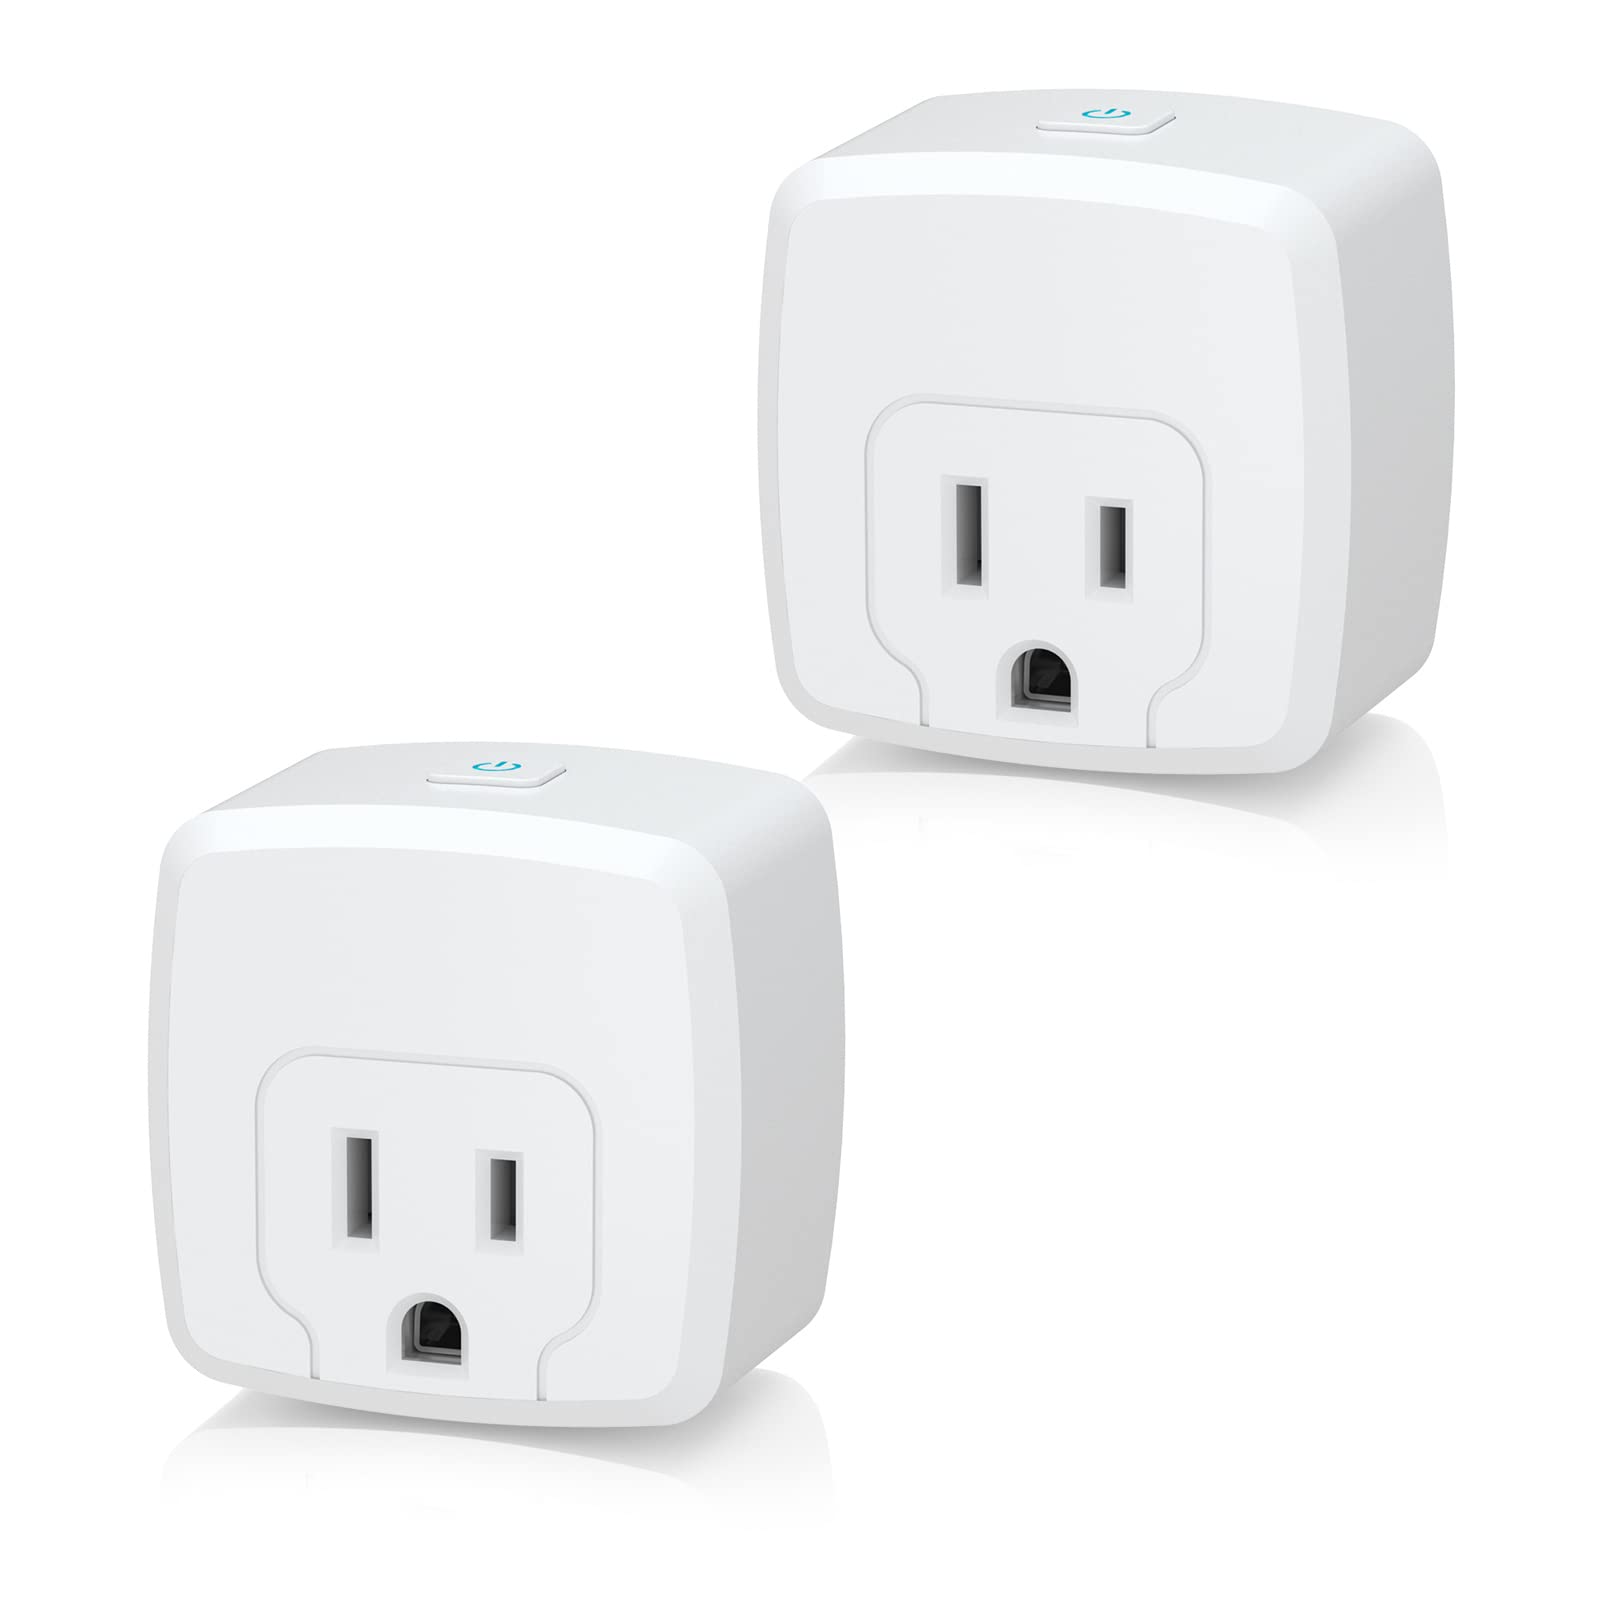 HBN Smart Plug Mini 15A, WiFi Smart Outlet Works with Alexa, Google Home Assistant, Remote Control with Timer Function, No Hub Required, ETL